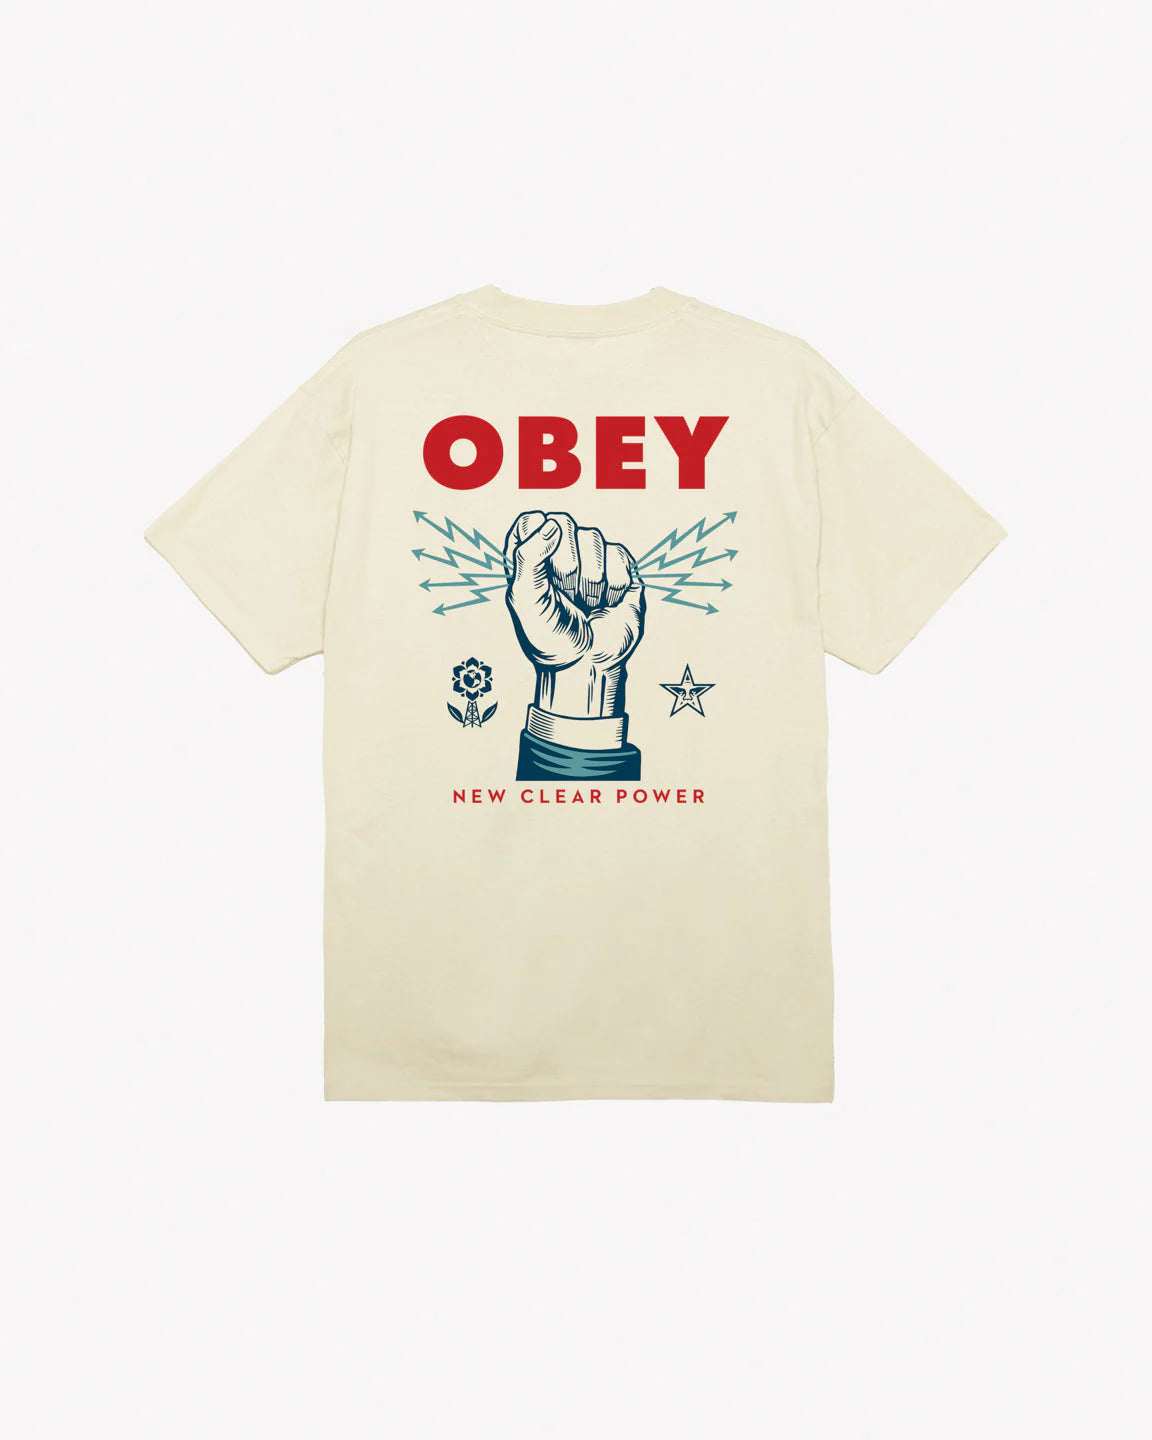 OBEY NEW CLEAR POWER T-SHIRT - Cream